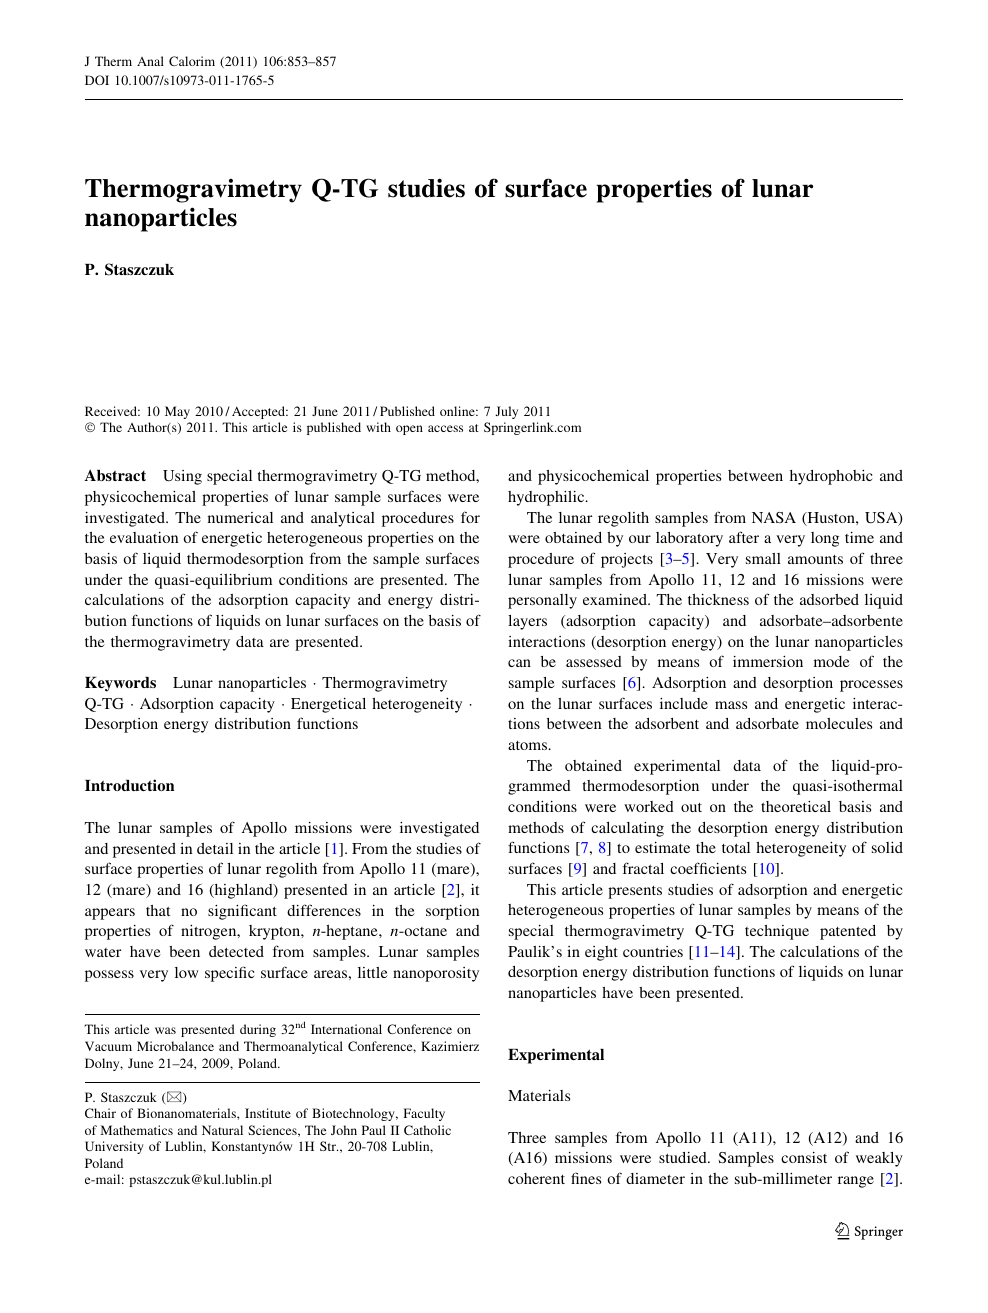 Thermogravimetry Q Tg Studies Of Surface Properties Of Lunar Nanoparticles Topic Of Research Paper In Nano Technology Download Scholarly Article Pdf And Read For Free On Cyberleninka Open Science Hub